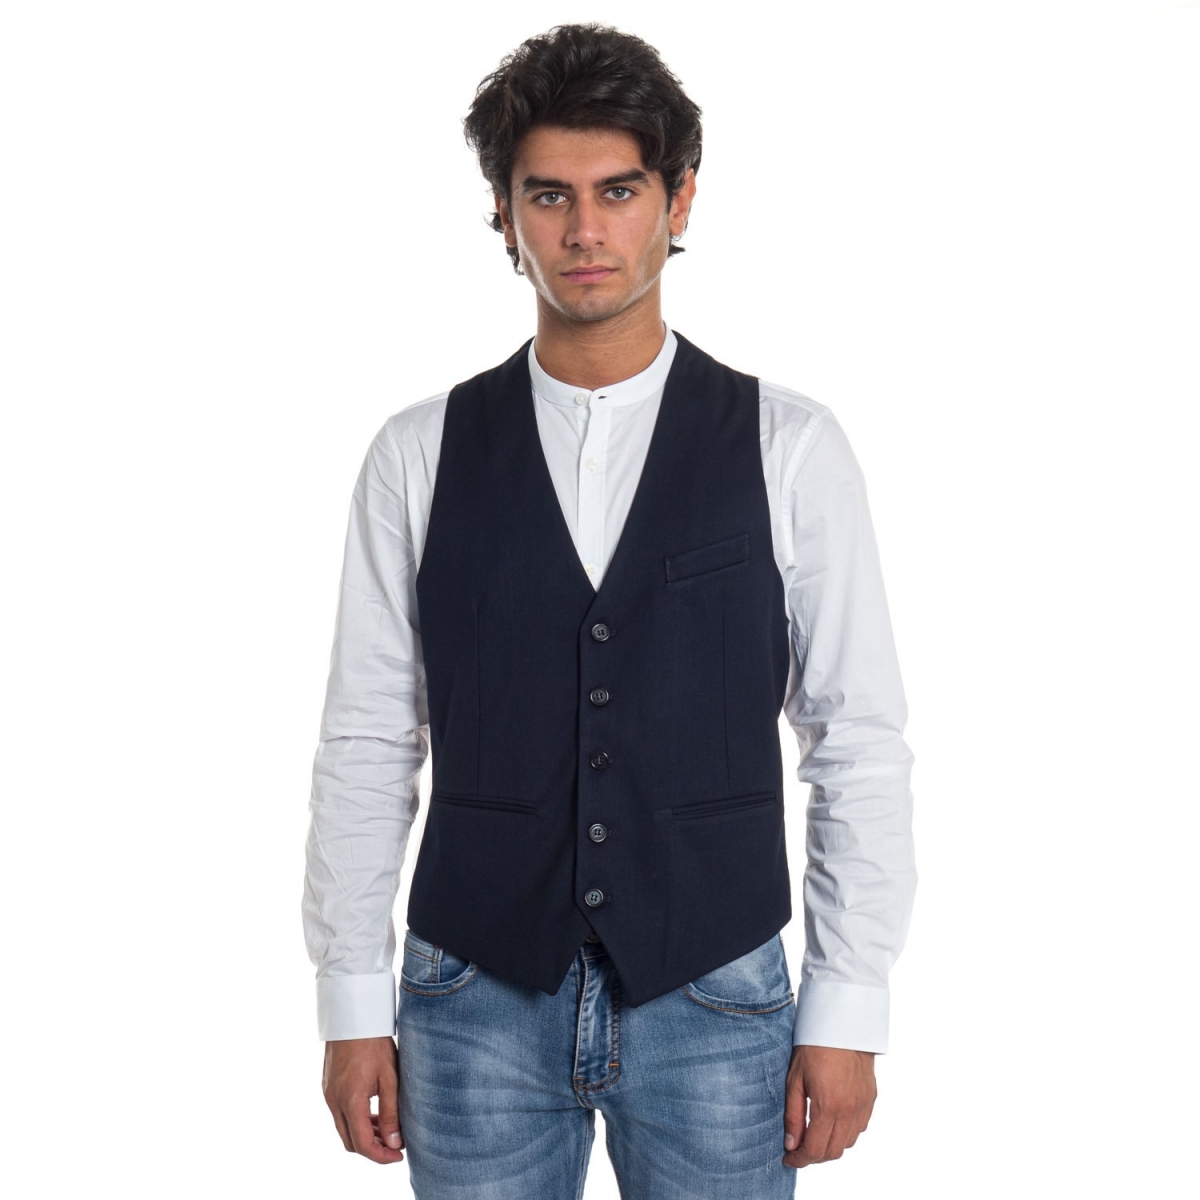 ropa Chaleco hombre Gilet GLGN21368 GIANNI LUPO Cafedelmar Shop